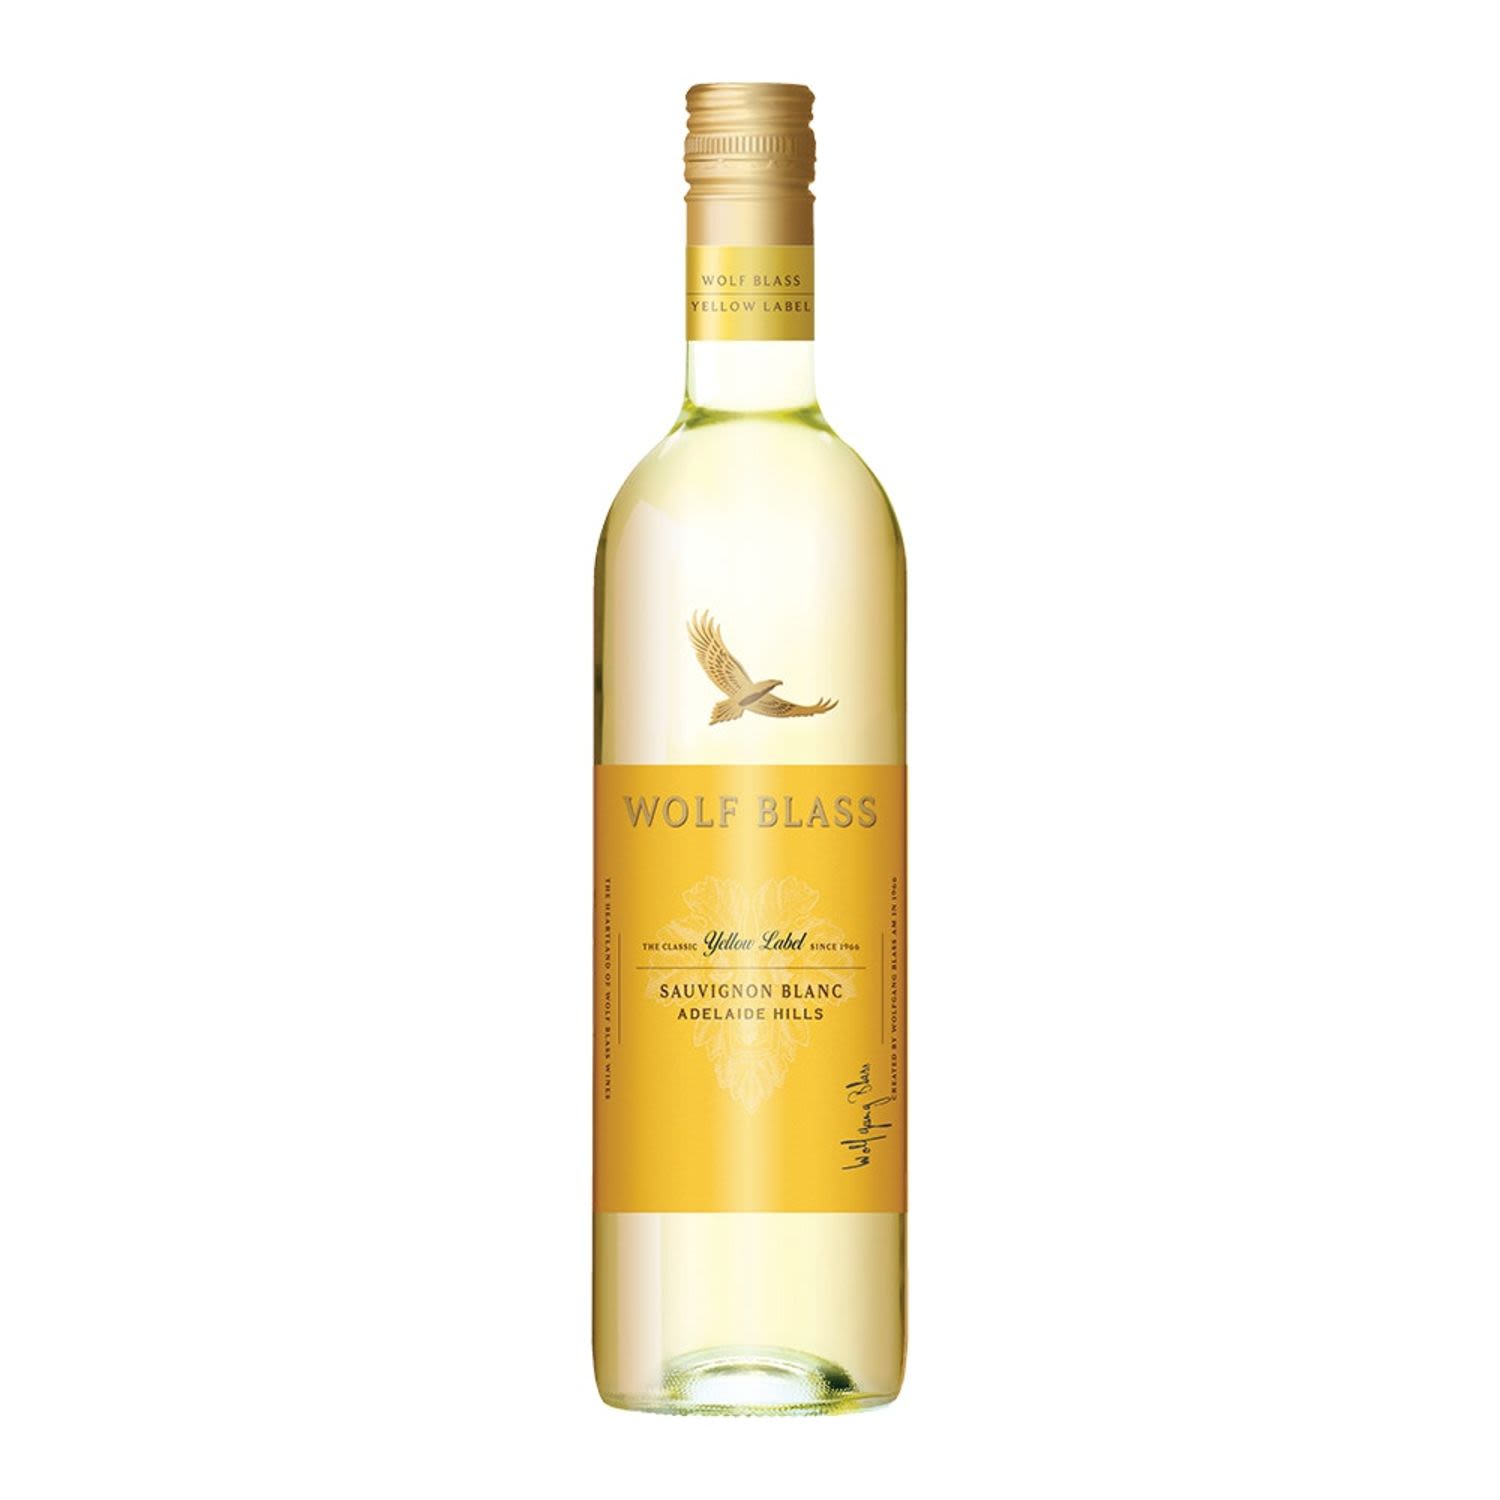 The nose displays lifted aromas of tropical fruit, citrus characters & hints of fresh grass. These characters continue with hints of citrus & spice across the long & refreshing palate.<br /> <br />Alcohol Volume: 13.00%<br /><br />Pack Format: Bottle<br /><br />Standard Drinks: 7.7</br /><br />Pack Type: Bottle<br /><br />Country of Origin: Australia<br /><br />Region: South Australia<br /><br />Vintage: Vintages Vary<br />